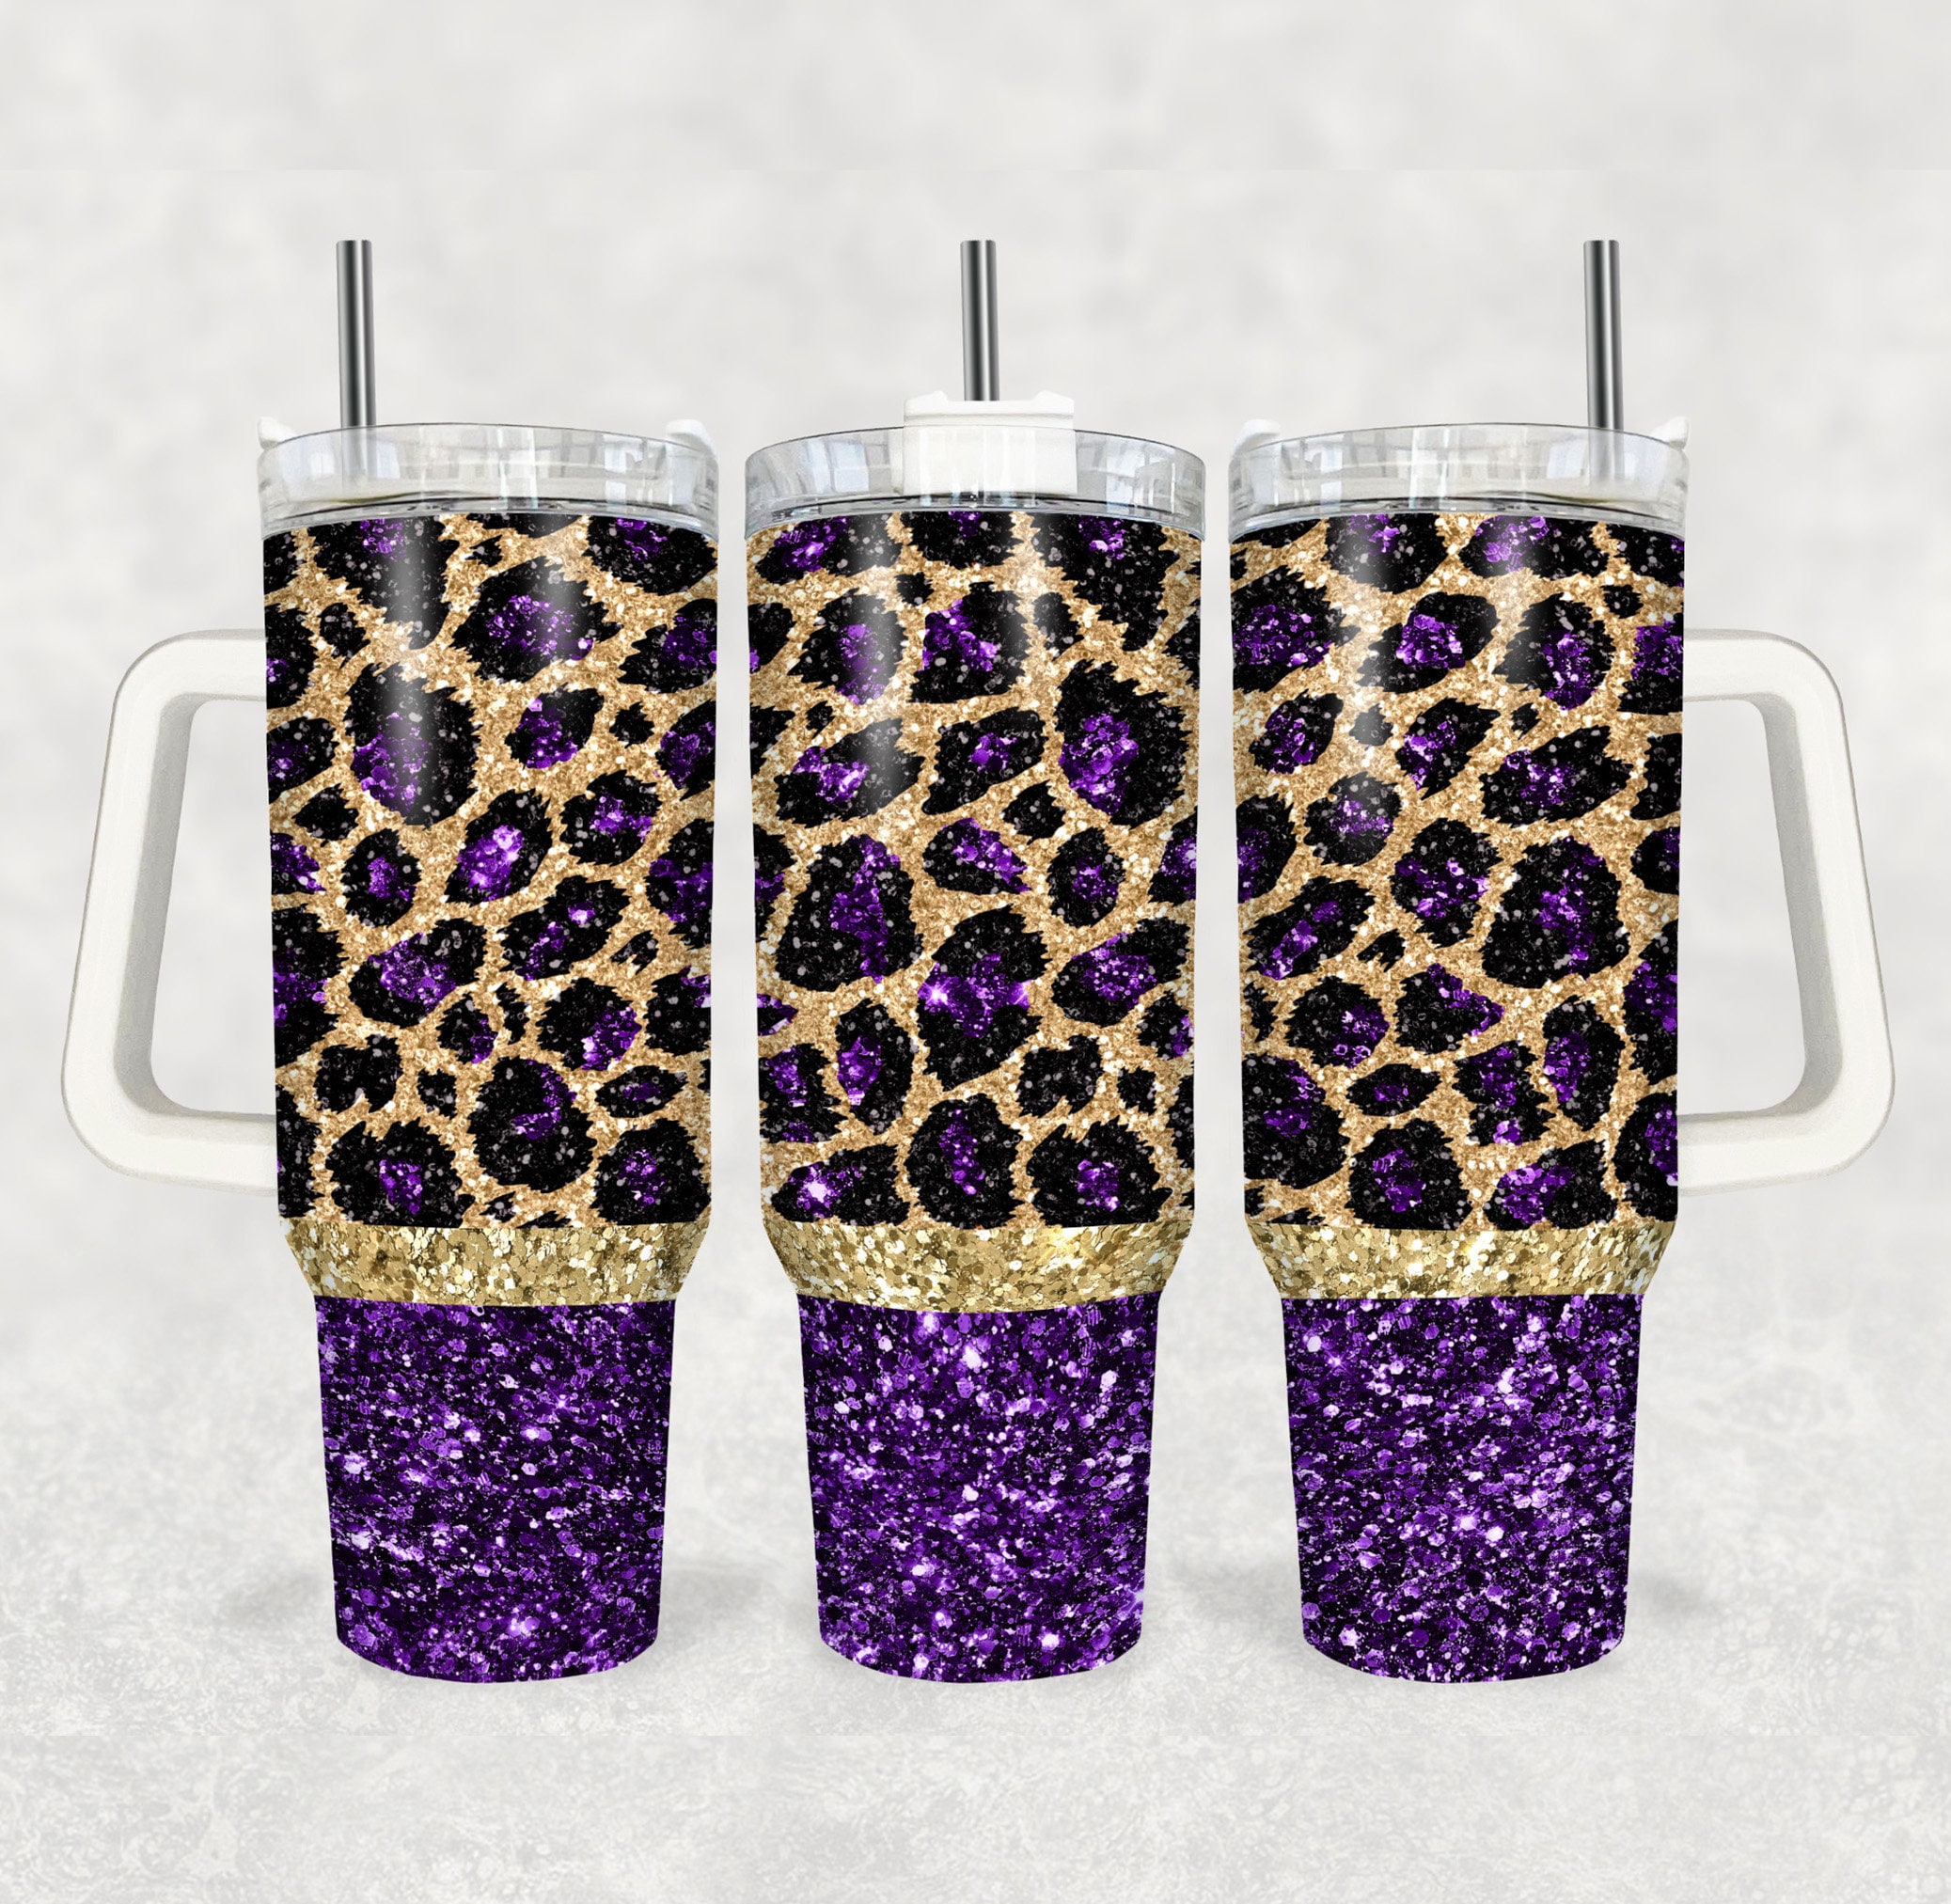 Lavender Stainless Steel 18oz Tumbler with Purple Jacket & Screw